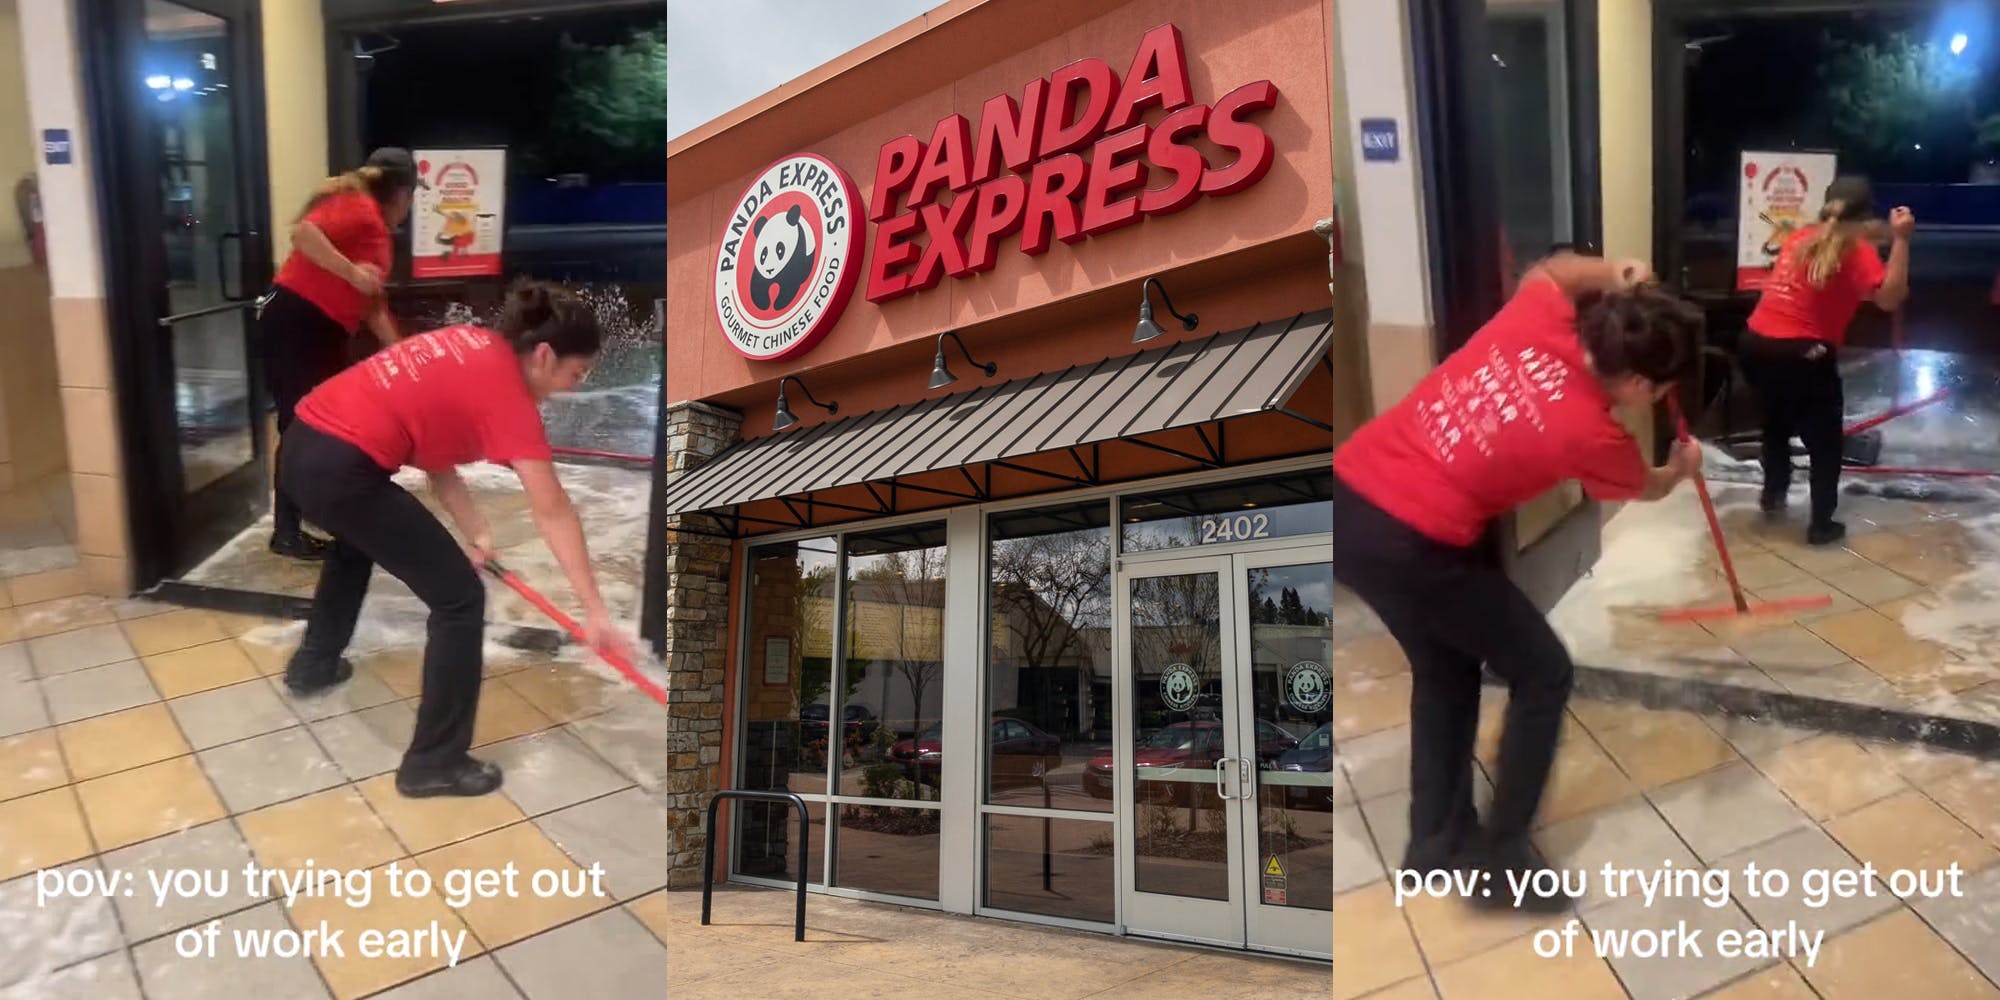 Panda Express employees mopping with caption "pov: you trying to get out of work early" (l) Panda Express building with sign (c) Panda Express employees mopping with caption "pov: you trying to get out of work early" (r)